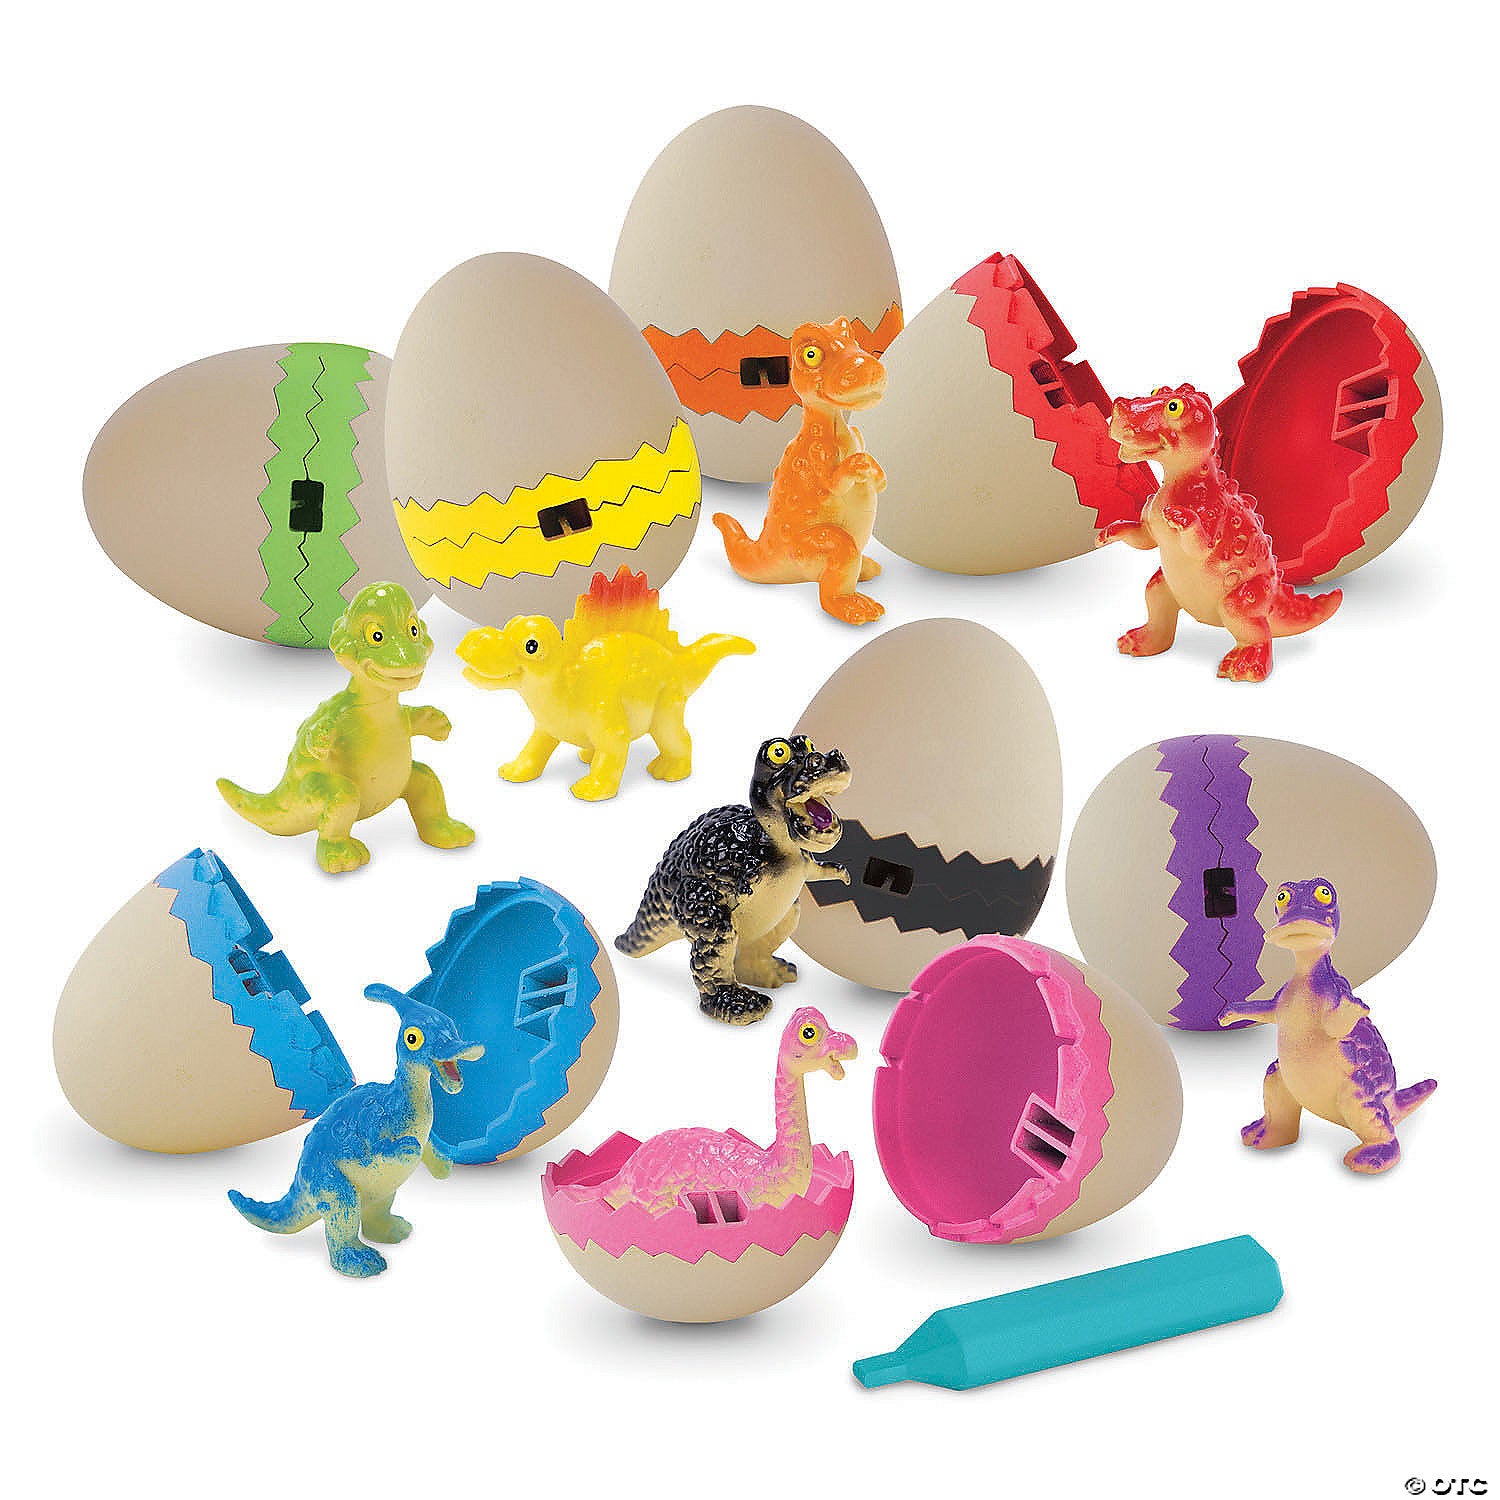 My First Dig It Up: Color Surprise Dinosaur Eggs by Mindware #13993221LL4521